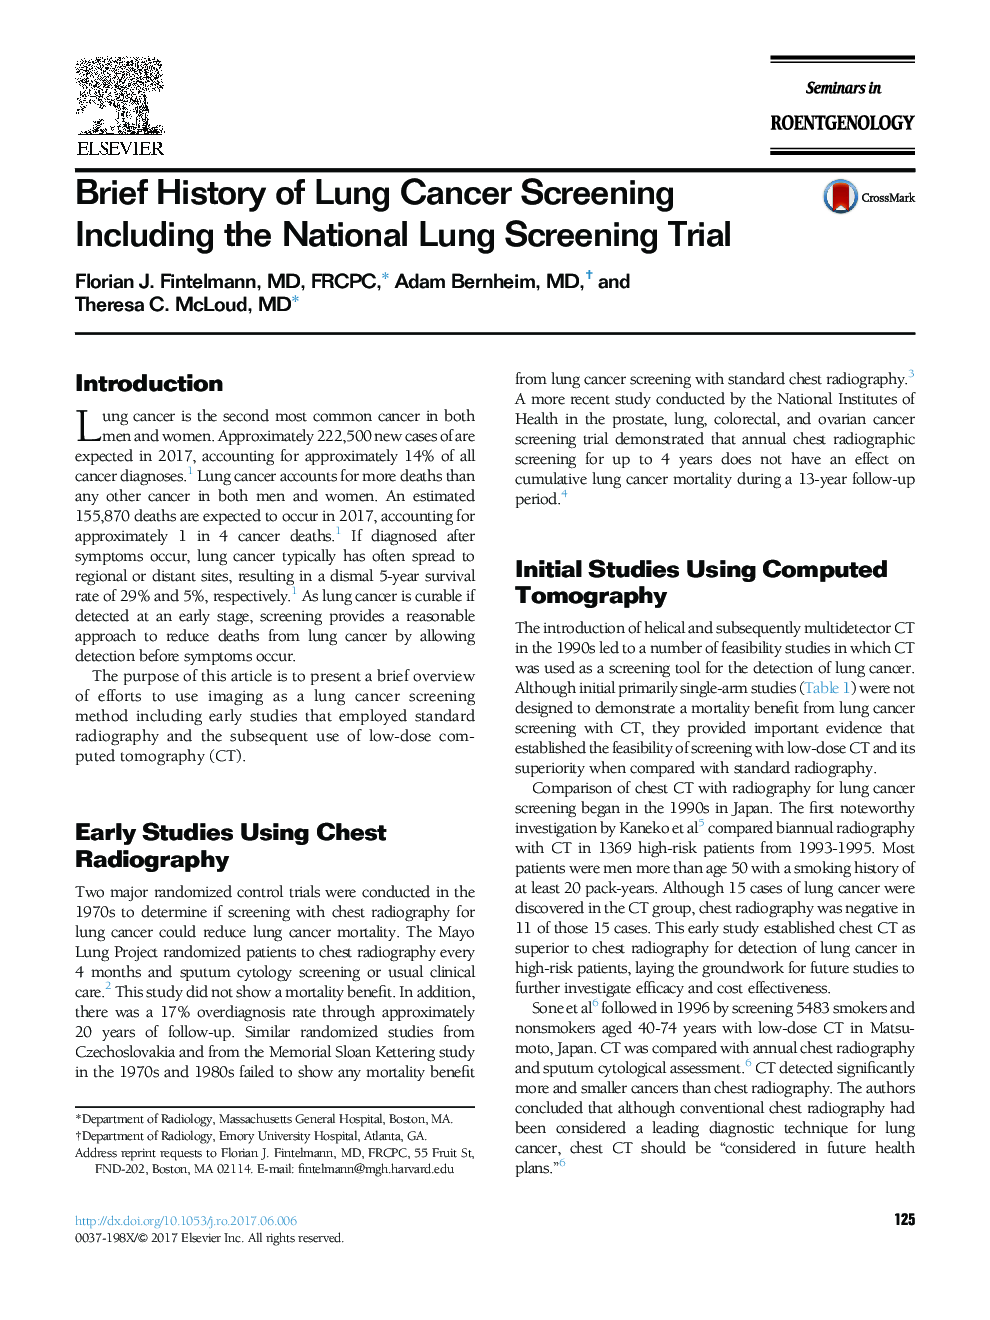 Brief History of Lung Cancer Screening Including the National Lung Screening Trial